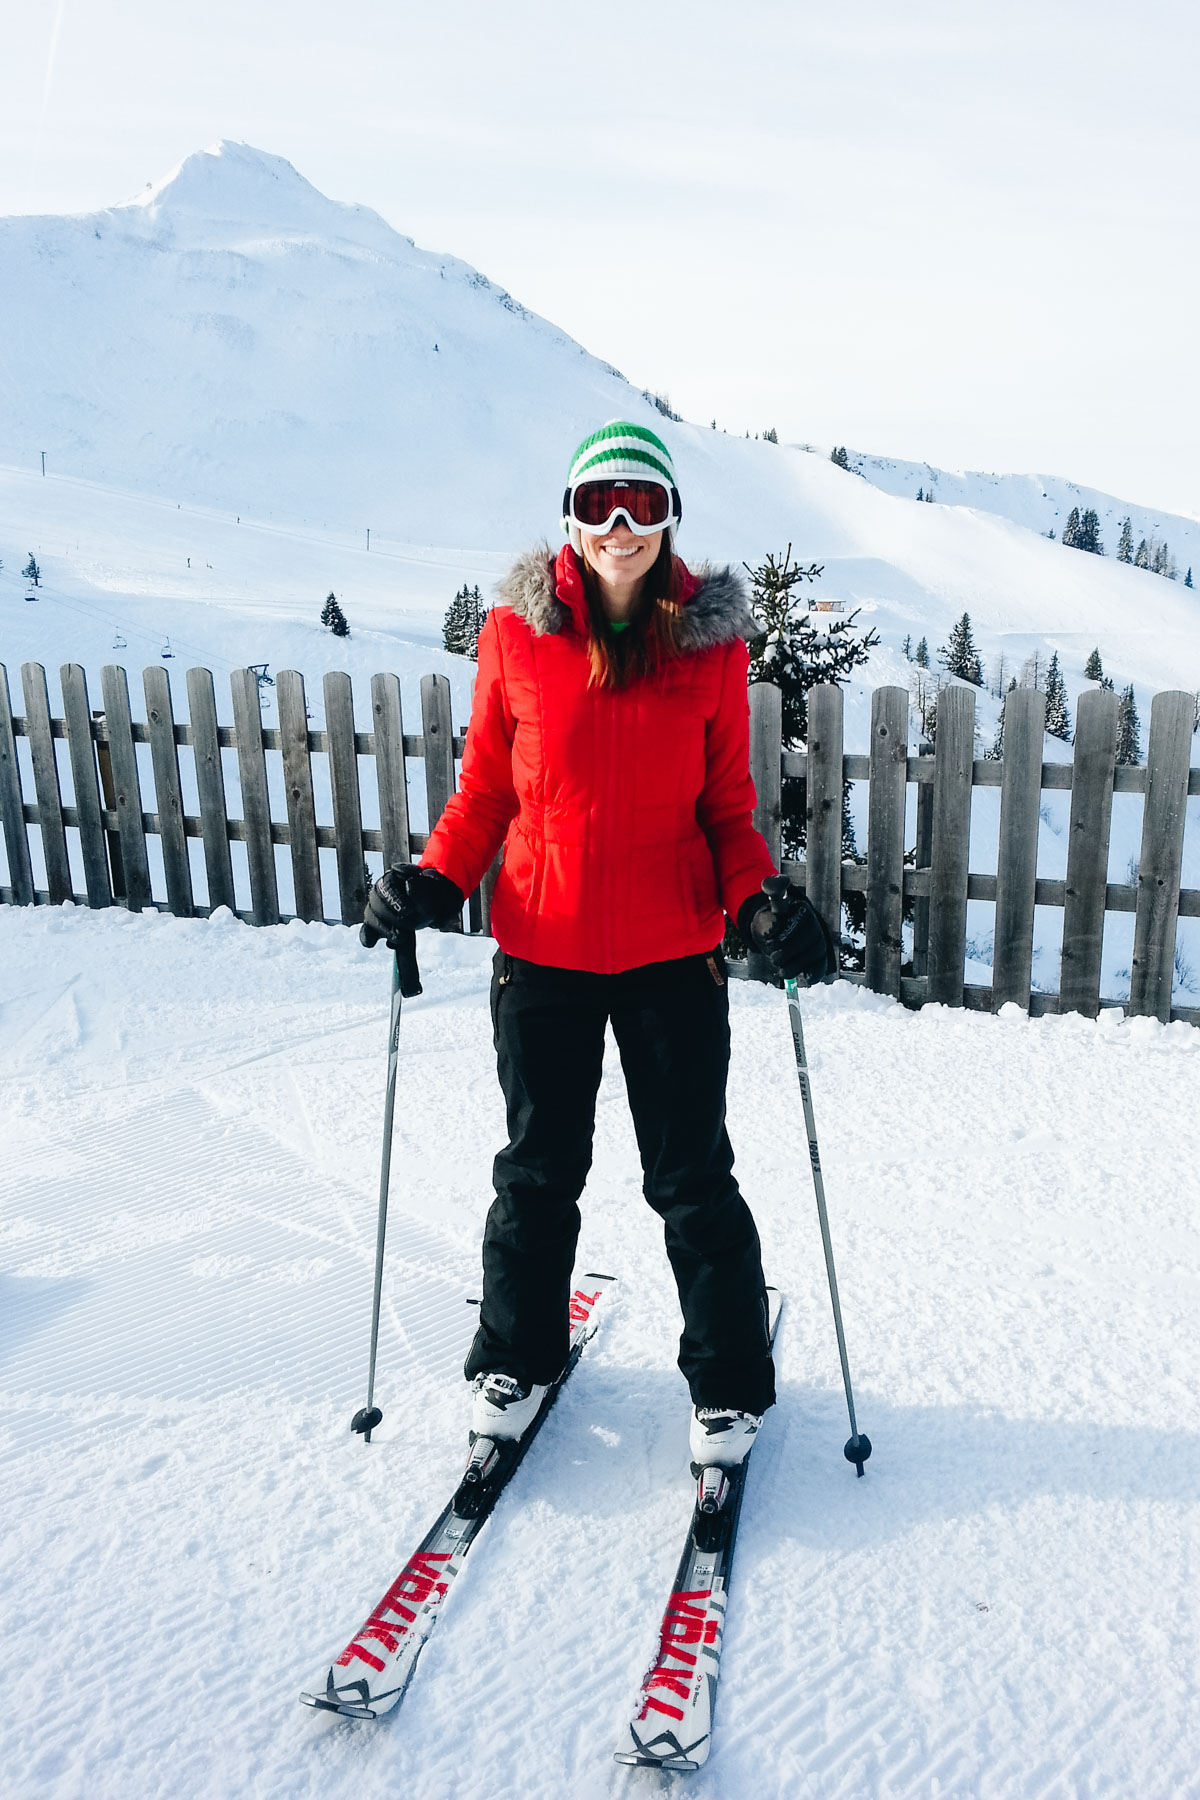 25 Helpful Tips For First-Time Skiers - The Wanderblogger